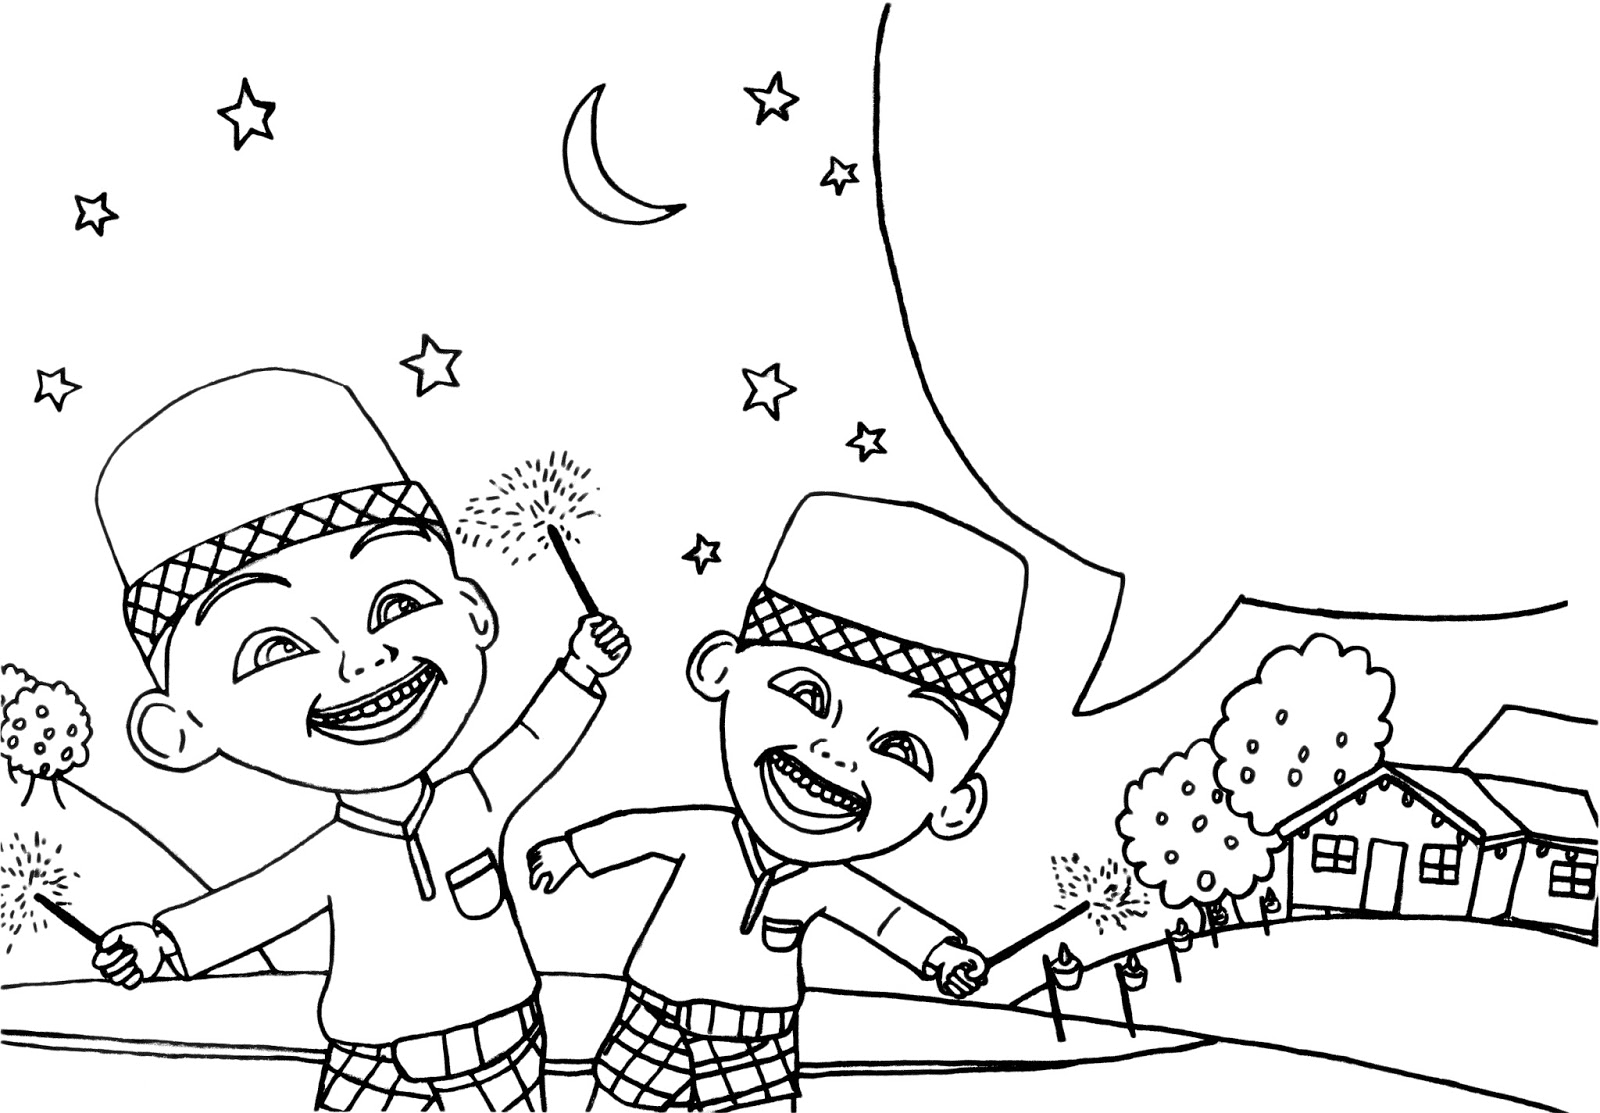 Upin & Ipin Celebrating Eid al-Fitr Colouring Pages - Picolour